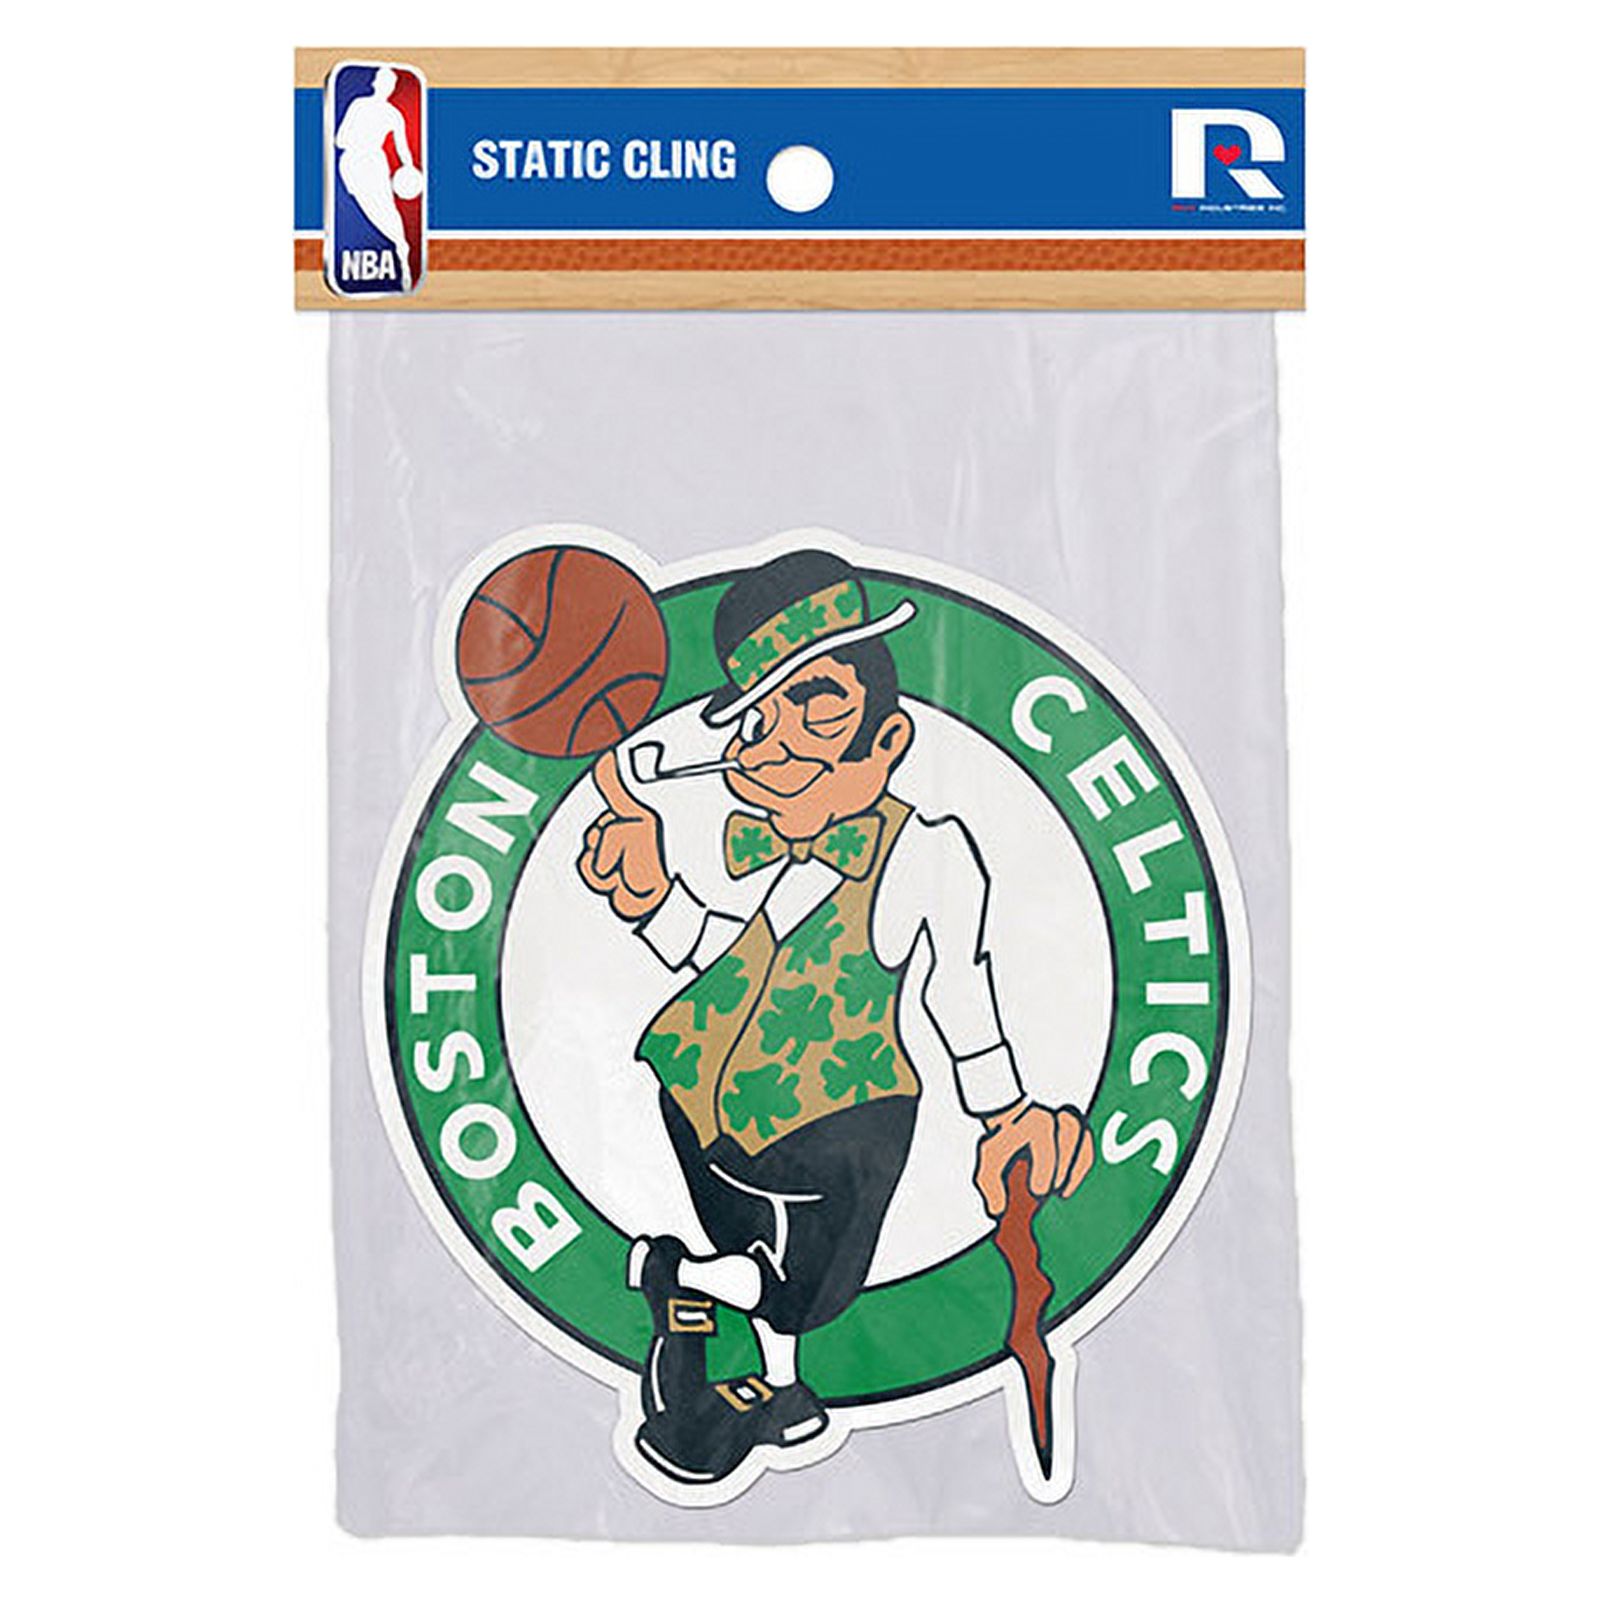 Boston Celtics Official NBA 5 inch  Car Window Cling Decal by Rico - image 1 of 1